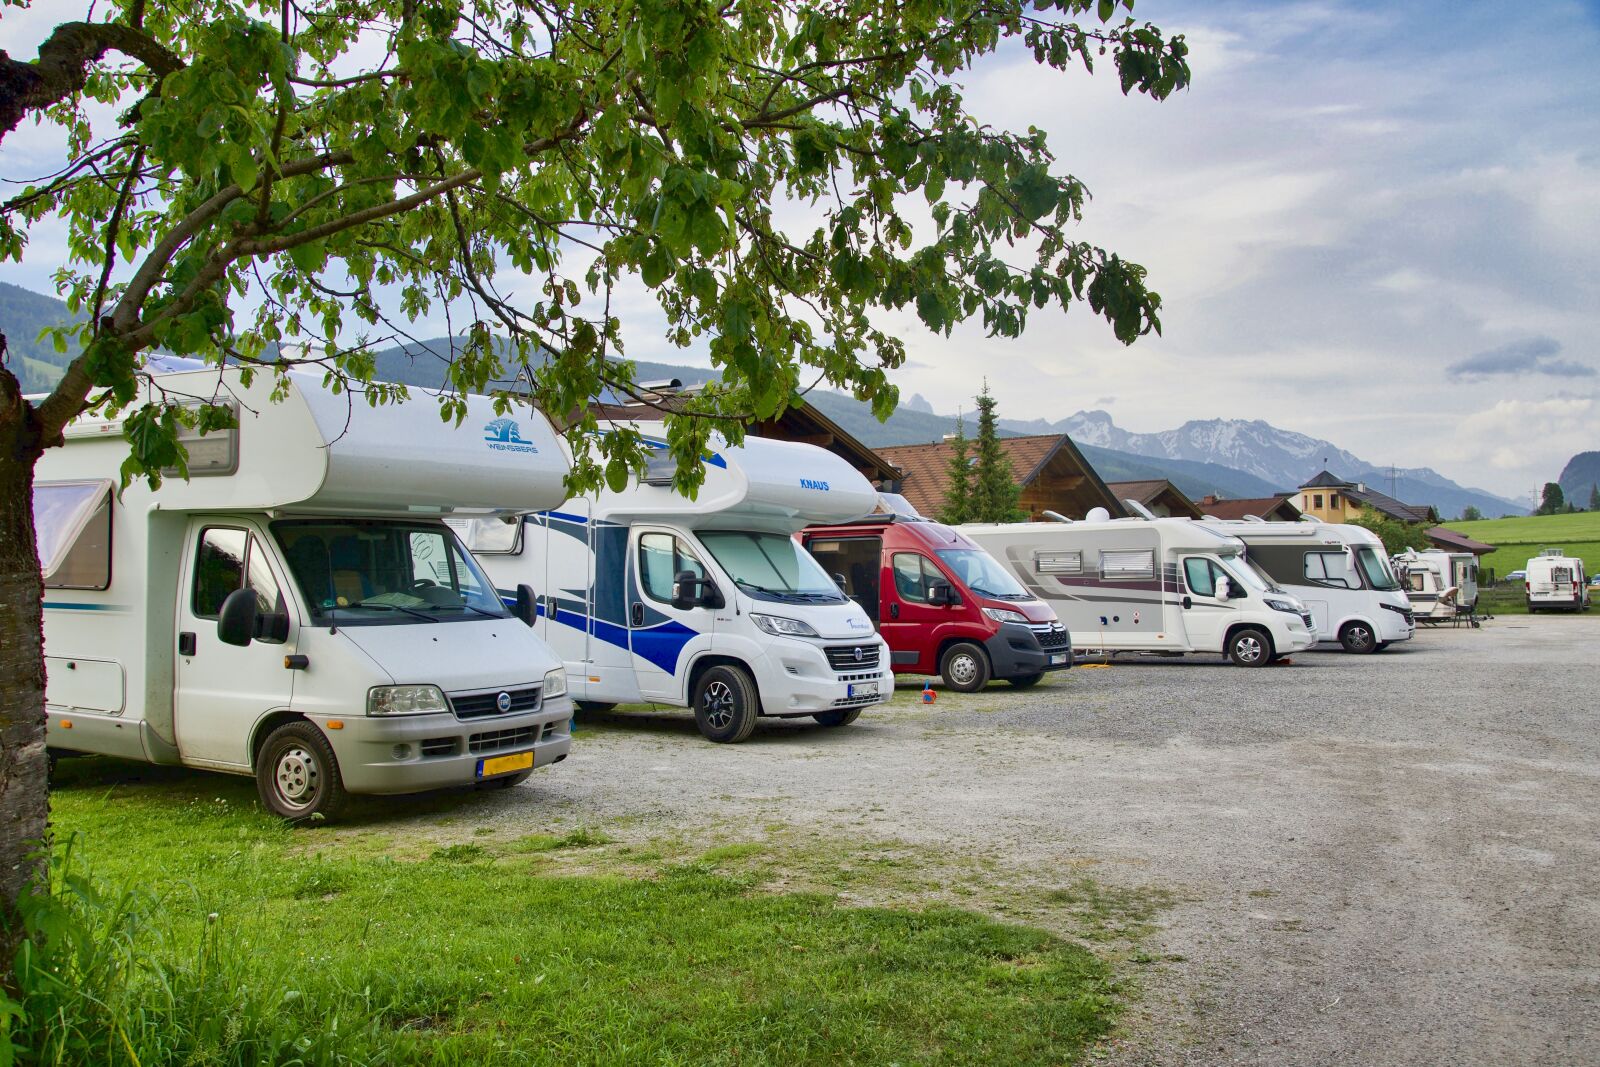 Sony a6500 sample photo. Motorhome, vacation, camper photography